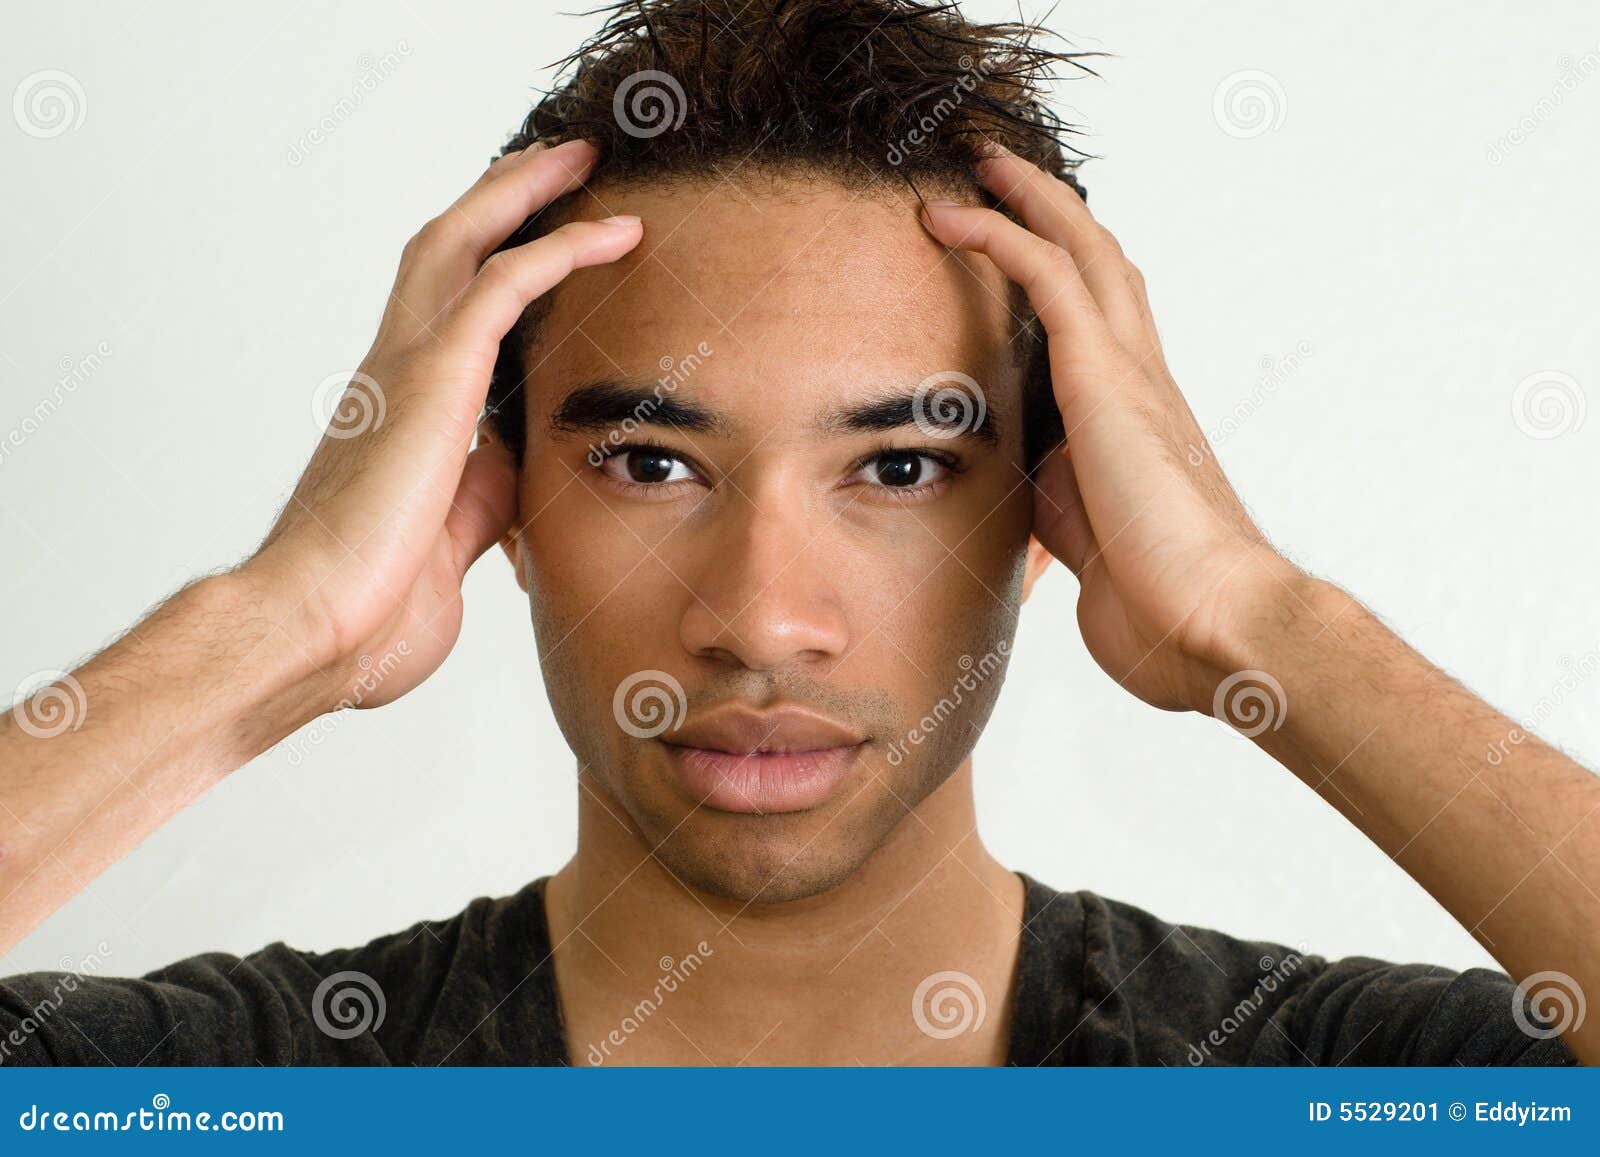 Head dizzy stock african american preview dreamstime